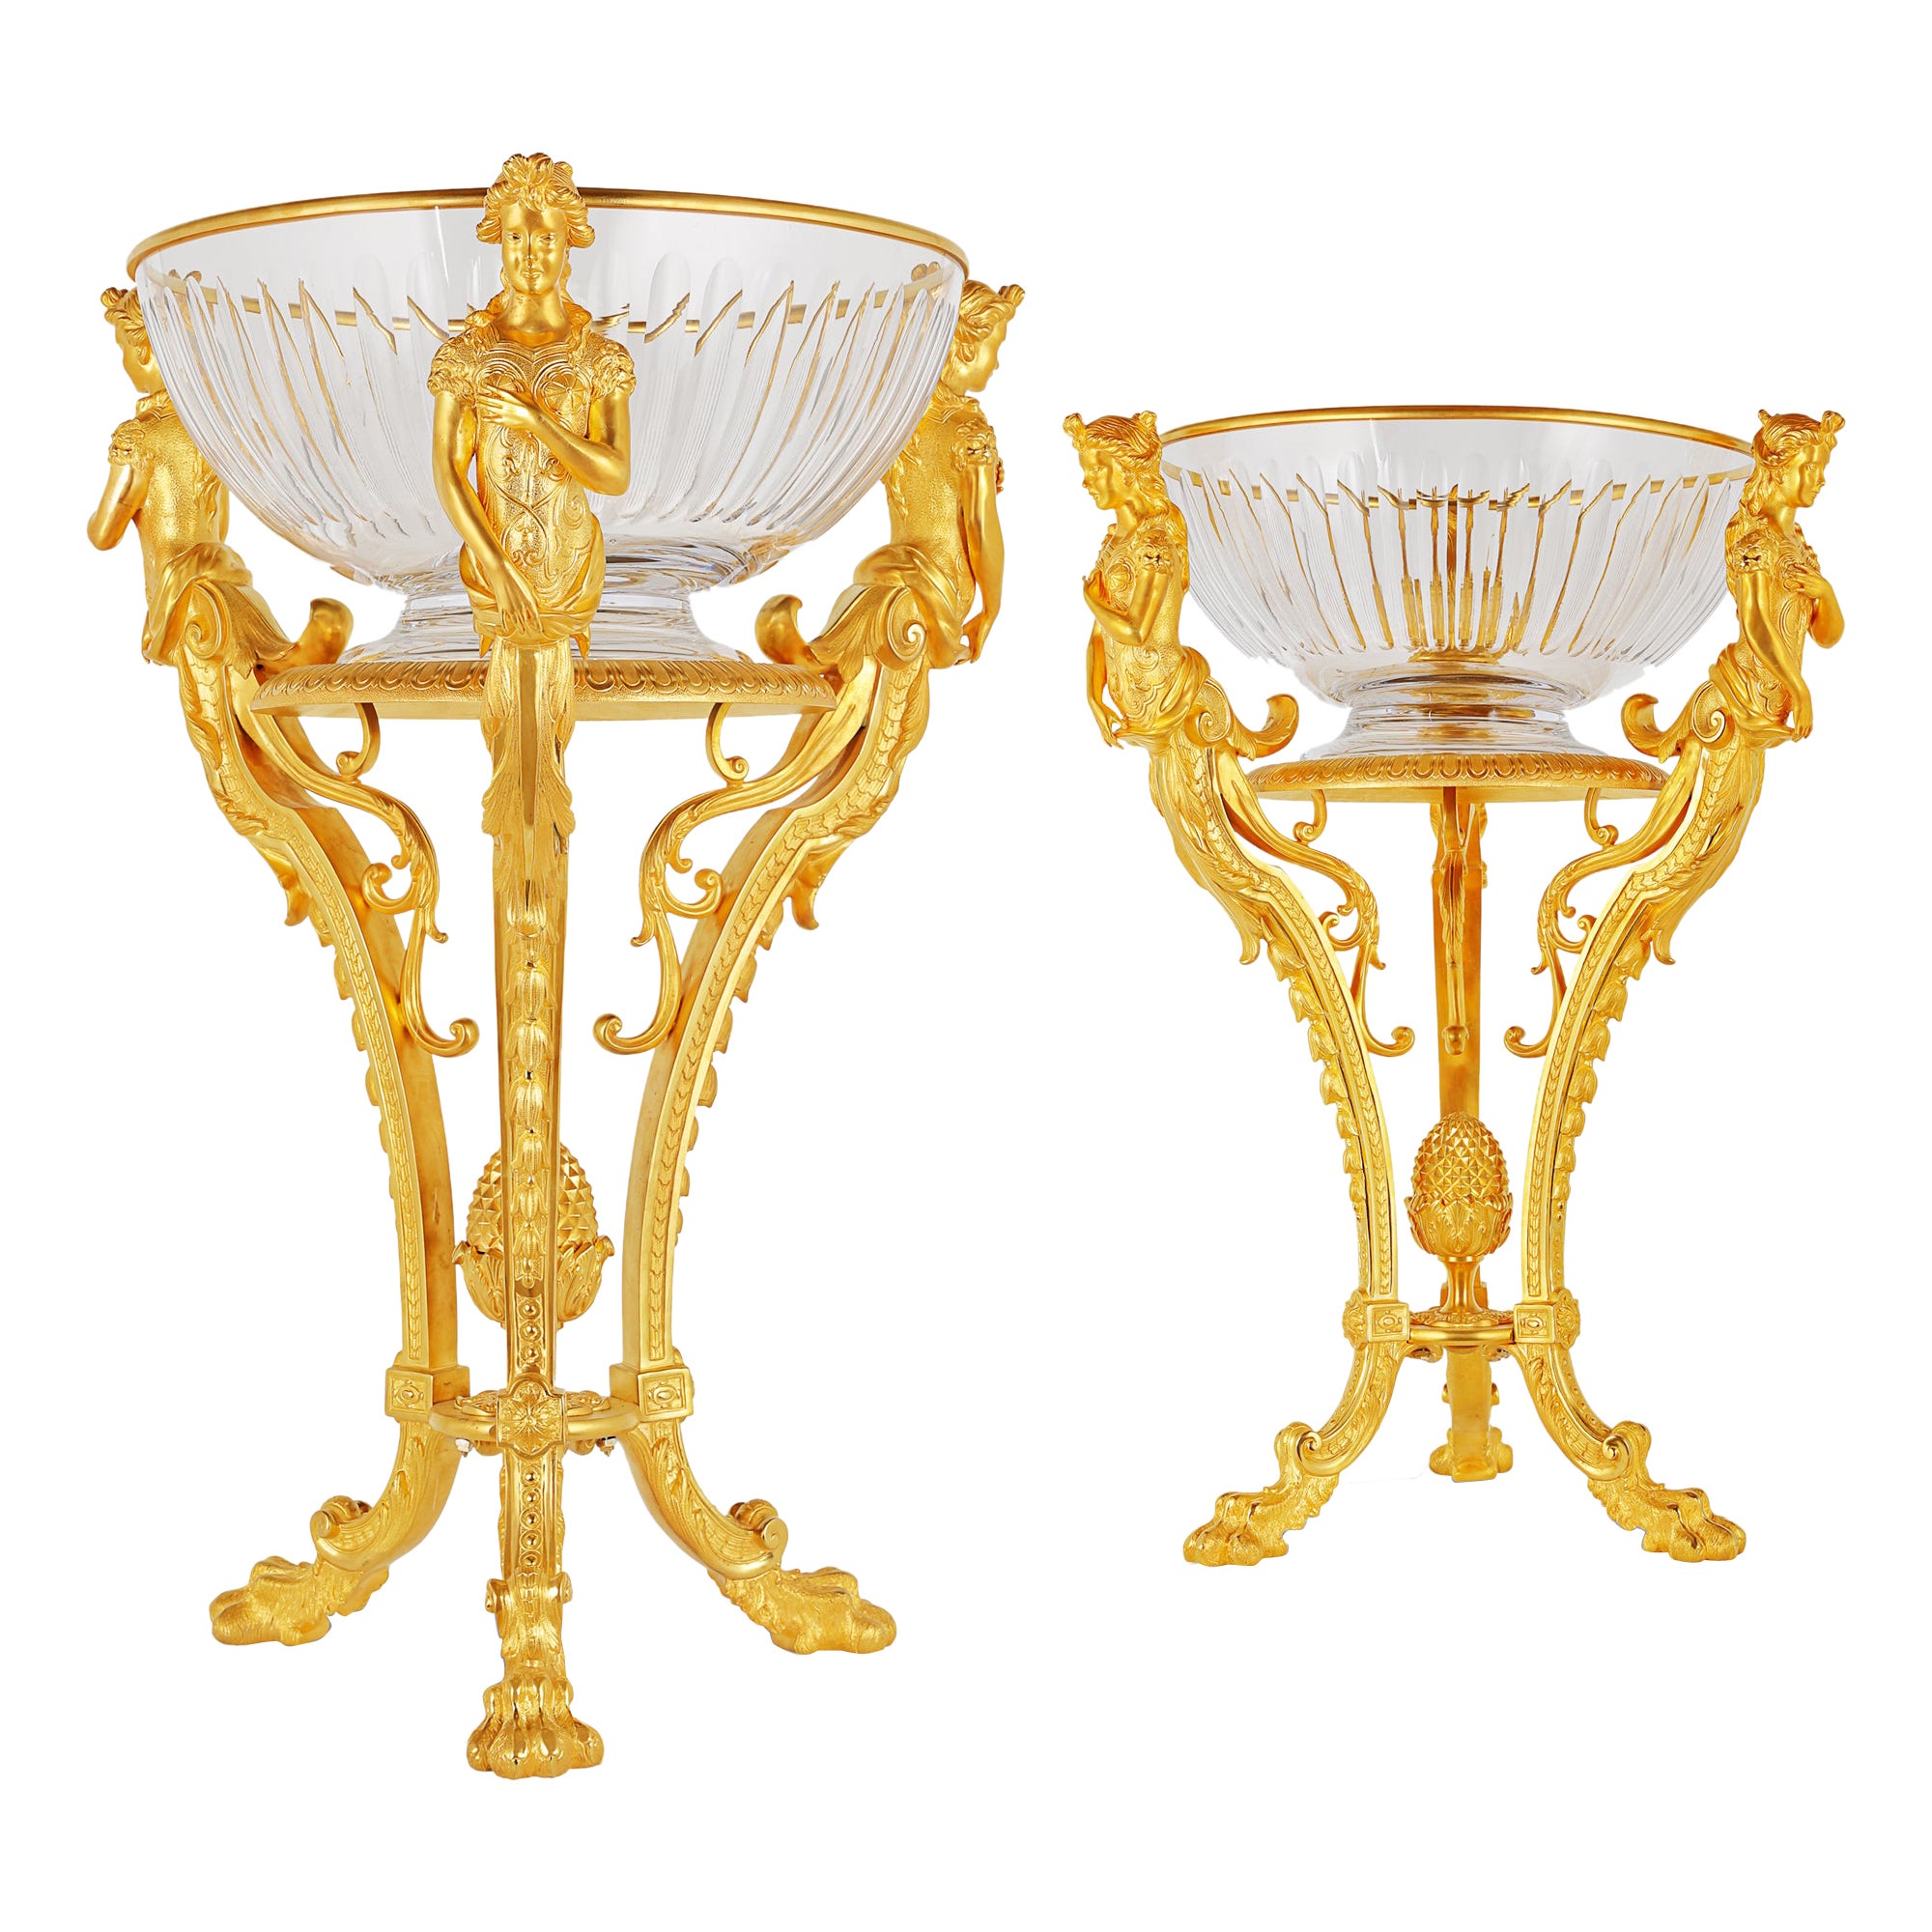 Pair of French Neoclassical Style Ormolu & Crystal Jardinieres For Sale